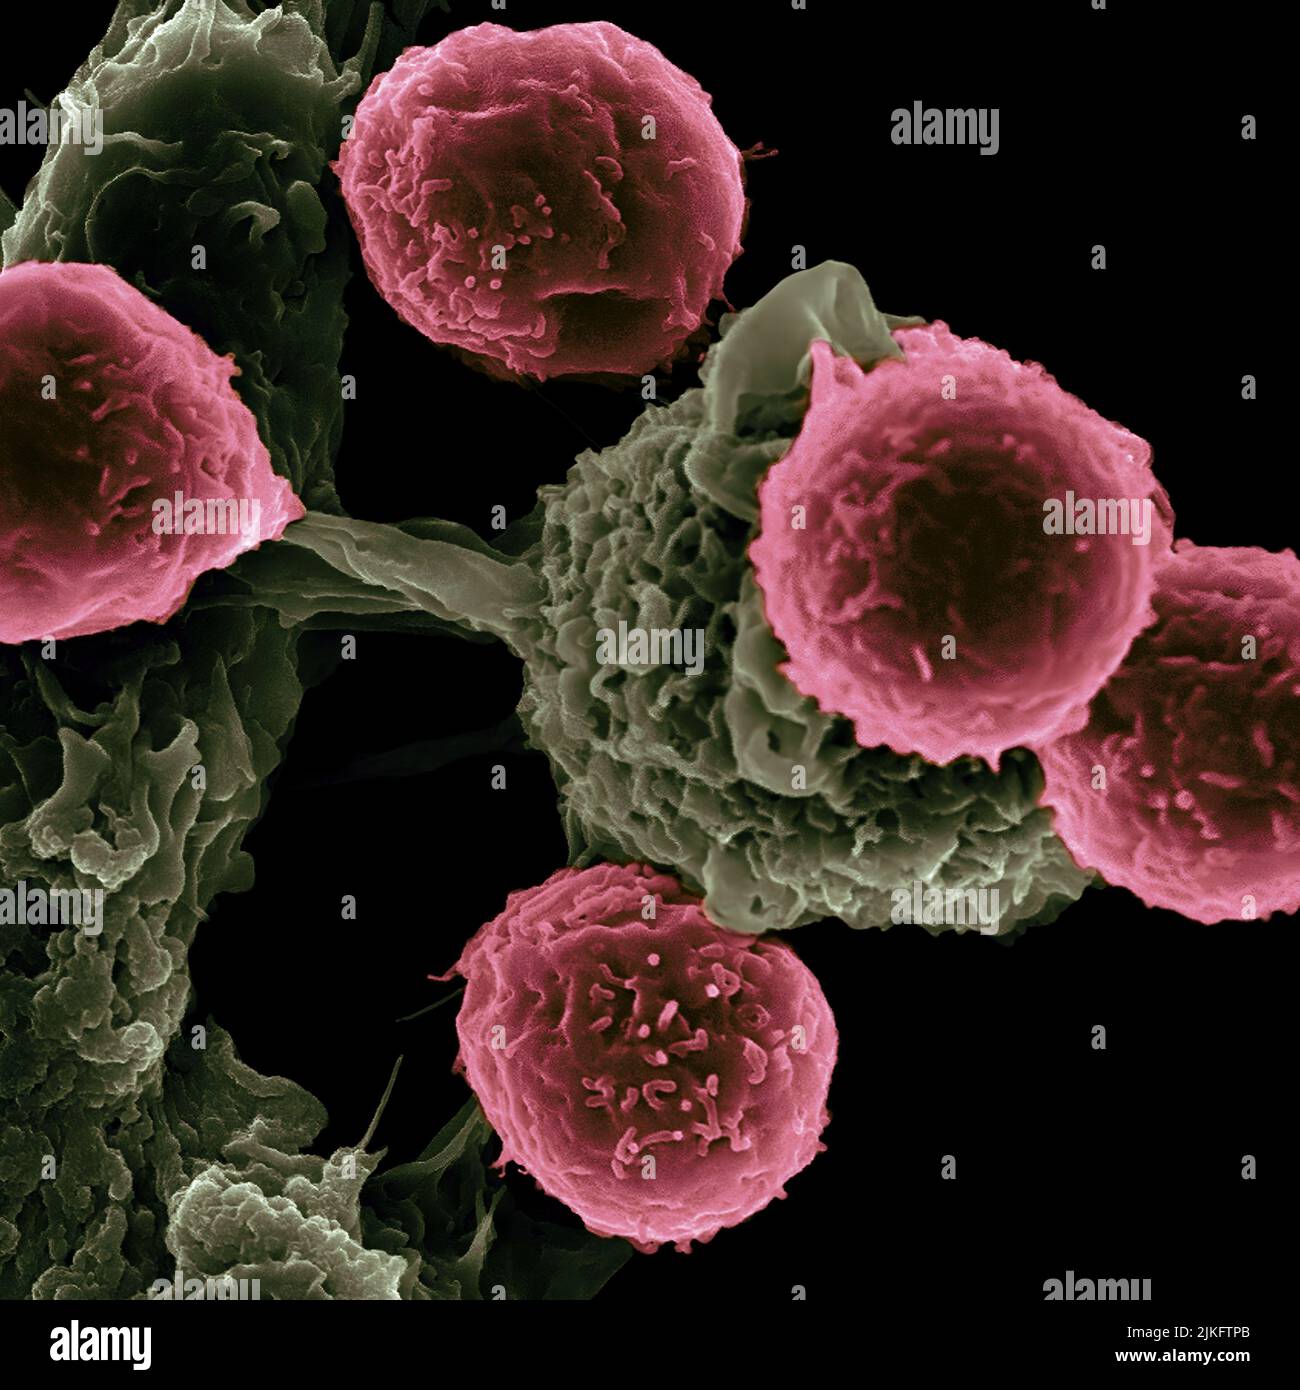 Researchers at the Texas Center for Cancer Nanomedicine (TCCN) have created particle-based vaccines for the treatment of cancer. The particles carry molecules that stimulate immune cells and cancer antigens (proteins) that direct the immune response. This scanning electron microscope image shows dendritic cells, pseudostained green, interacting with T cells, pseudostained pink. Dendritic cells internalize particles, provoke antigens and present peptides to T cells to direct immune responses. Stock Photo